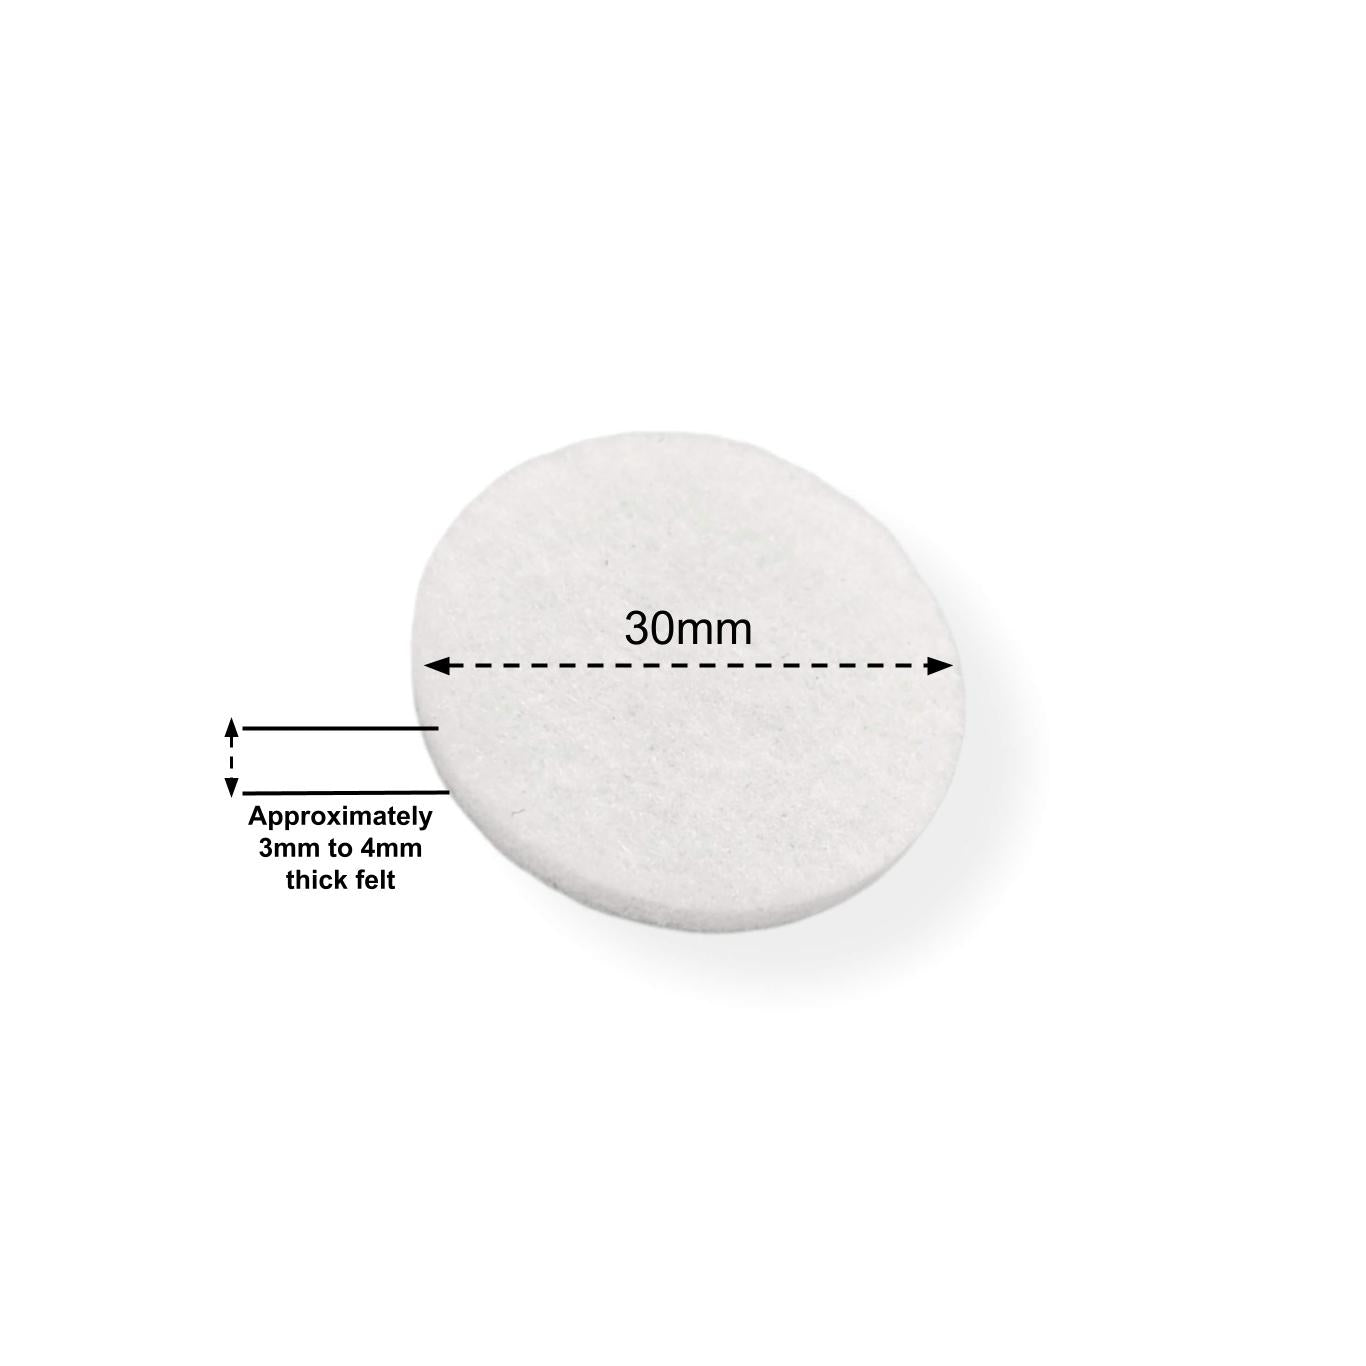 Felt Pads - White Self Adhesive Stick on Felt - Round 30mm Diameter - Made in Germany - Keay Vital Parts